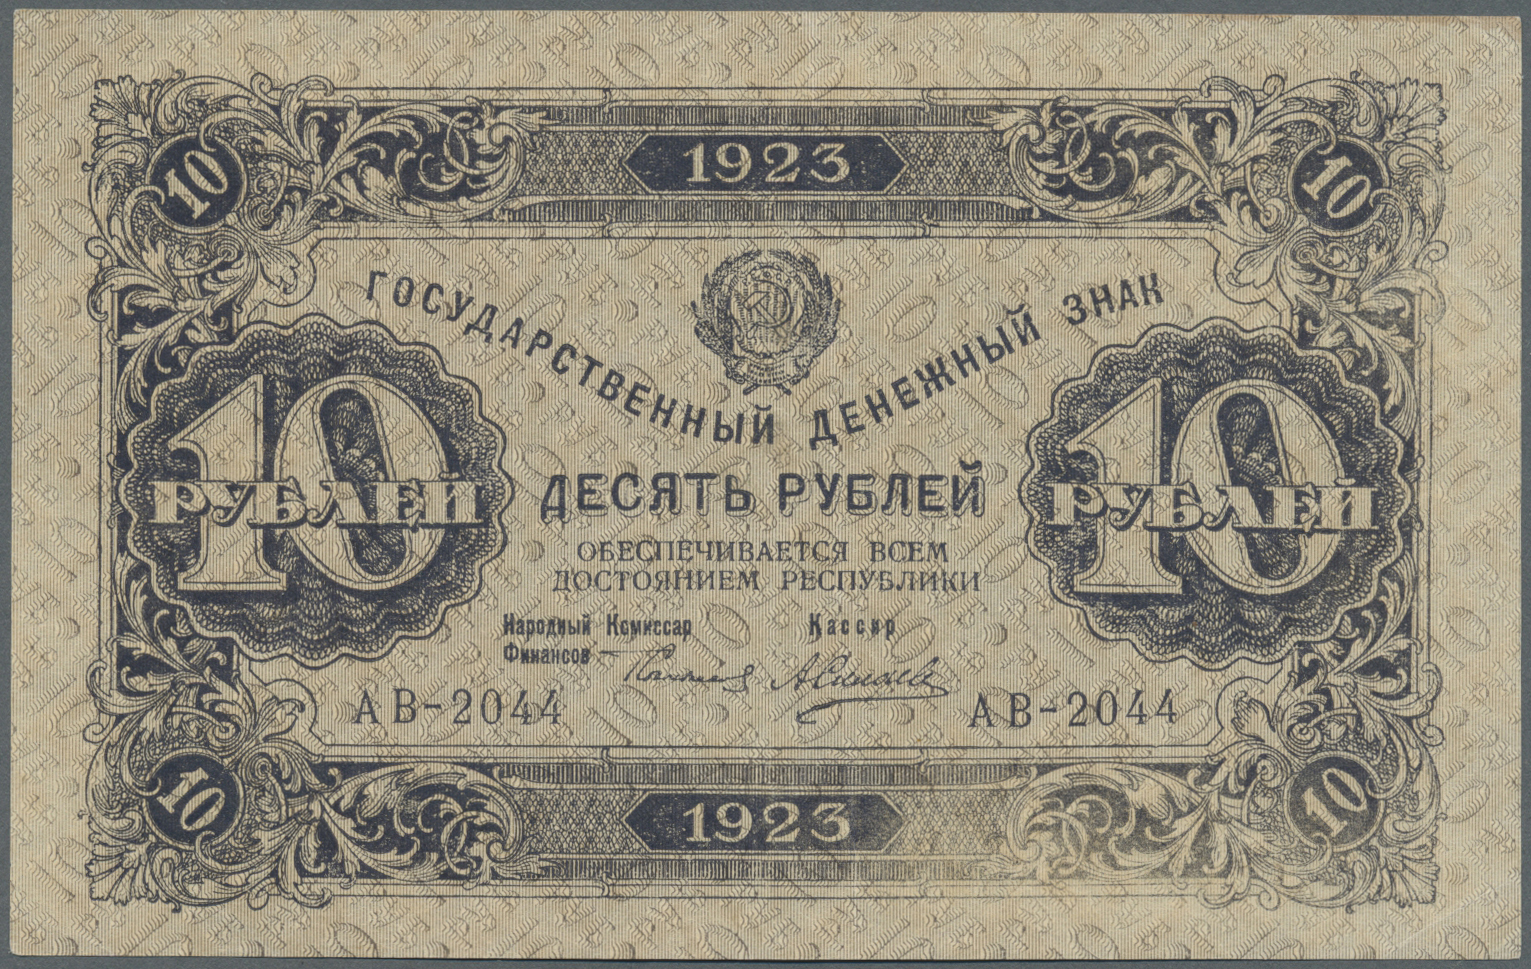 02165 Russia / Russland: 10 Rubles 1923 P. 158 With Center Fold, Condition: VF+. - Russia